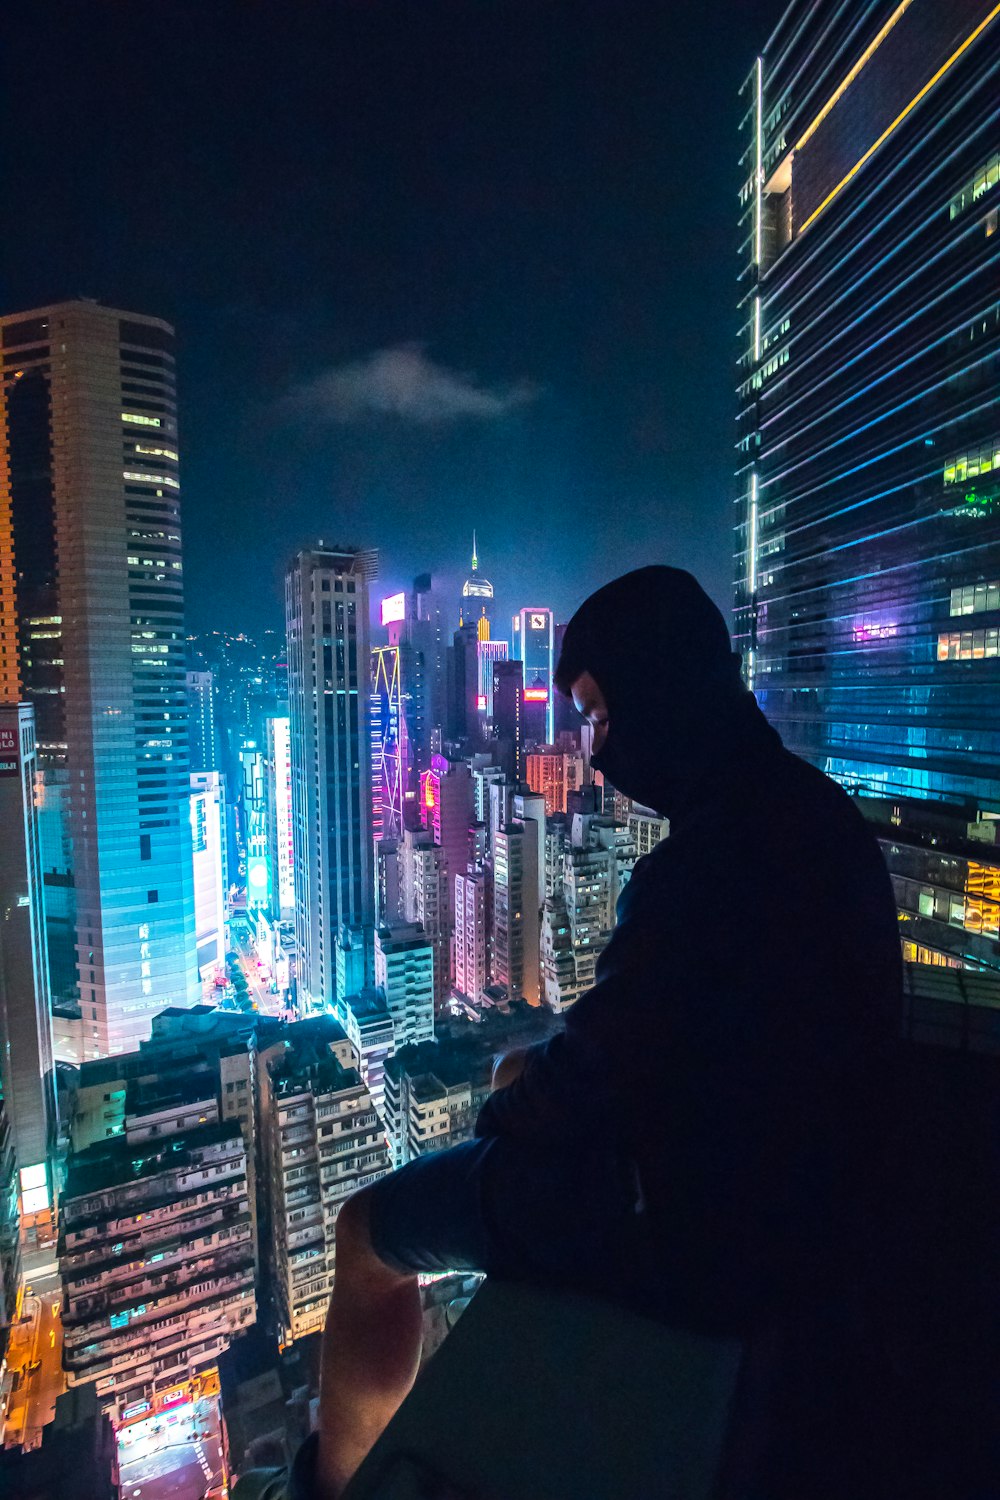 man sitting on rooftop looking on city with high-rise buildings